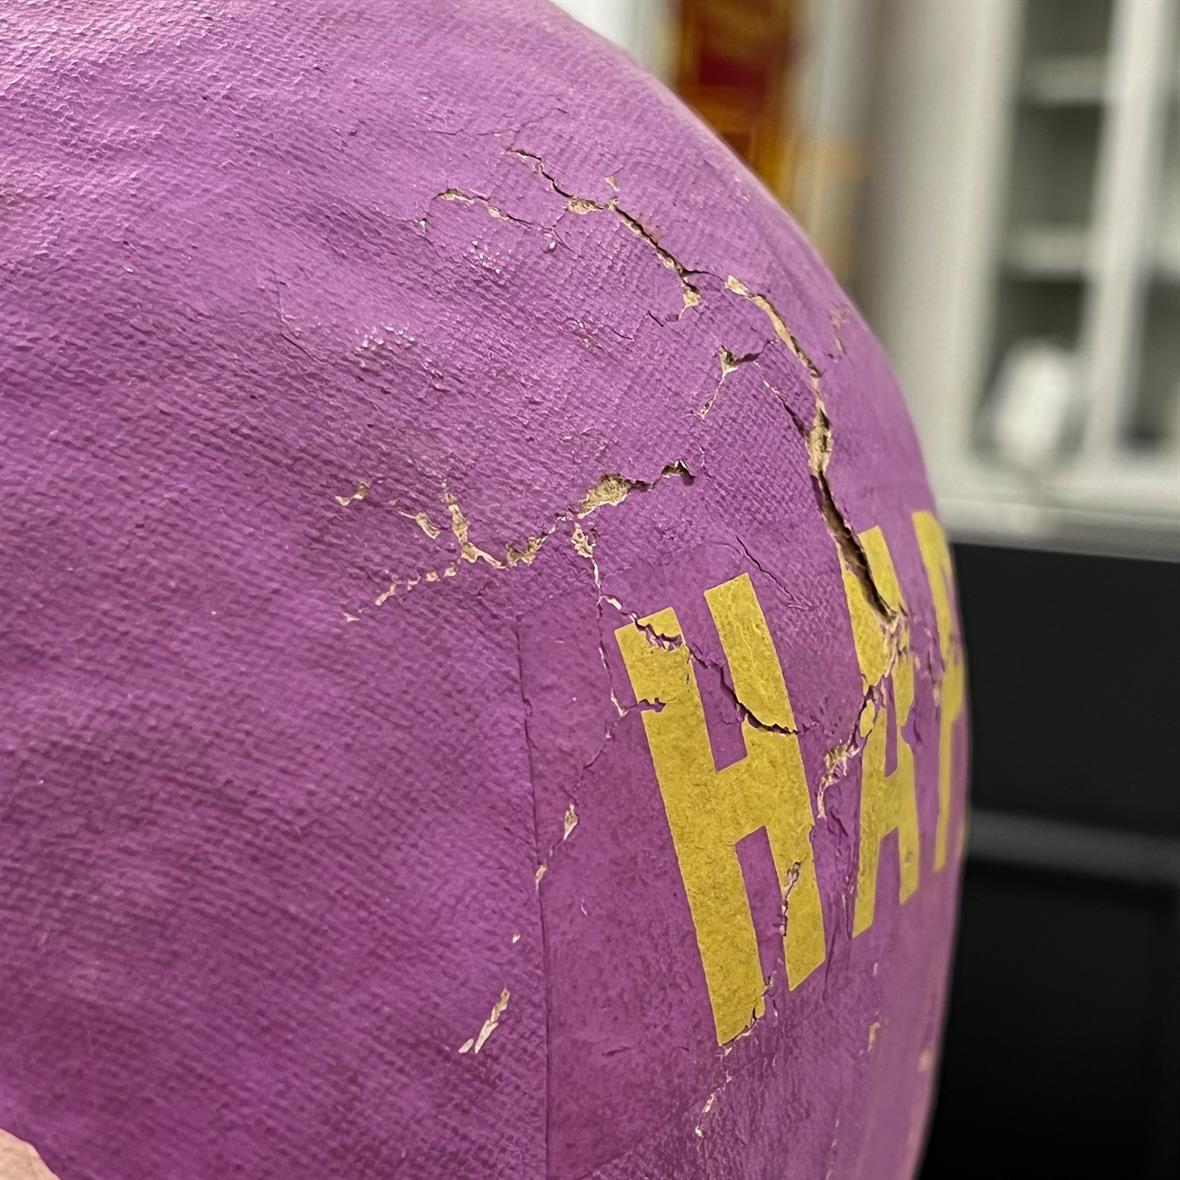 Detail image of cracks in the paper mache covering of the Easter egg.